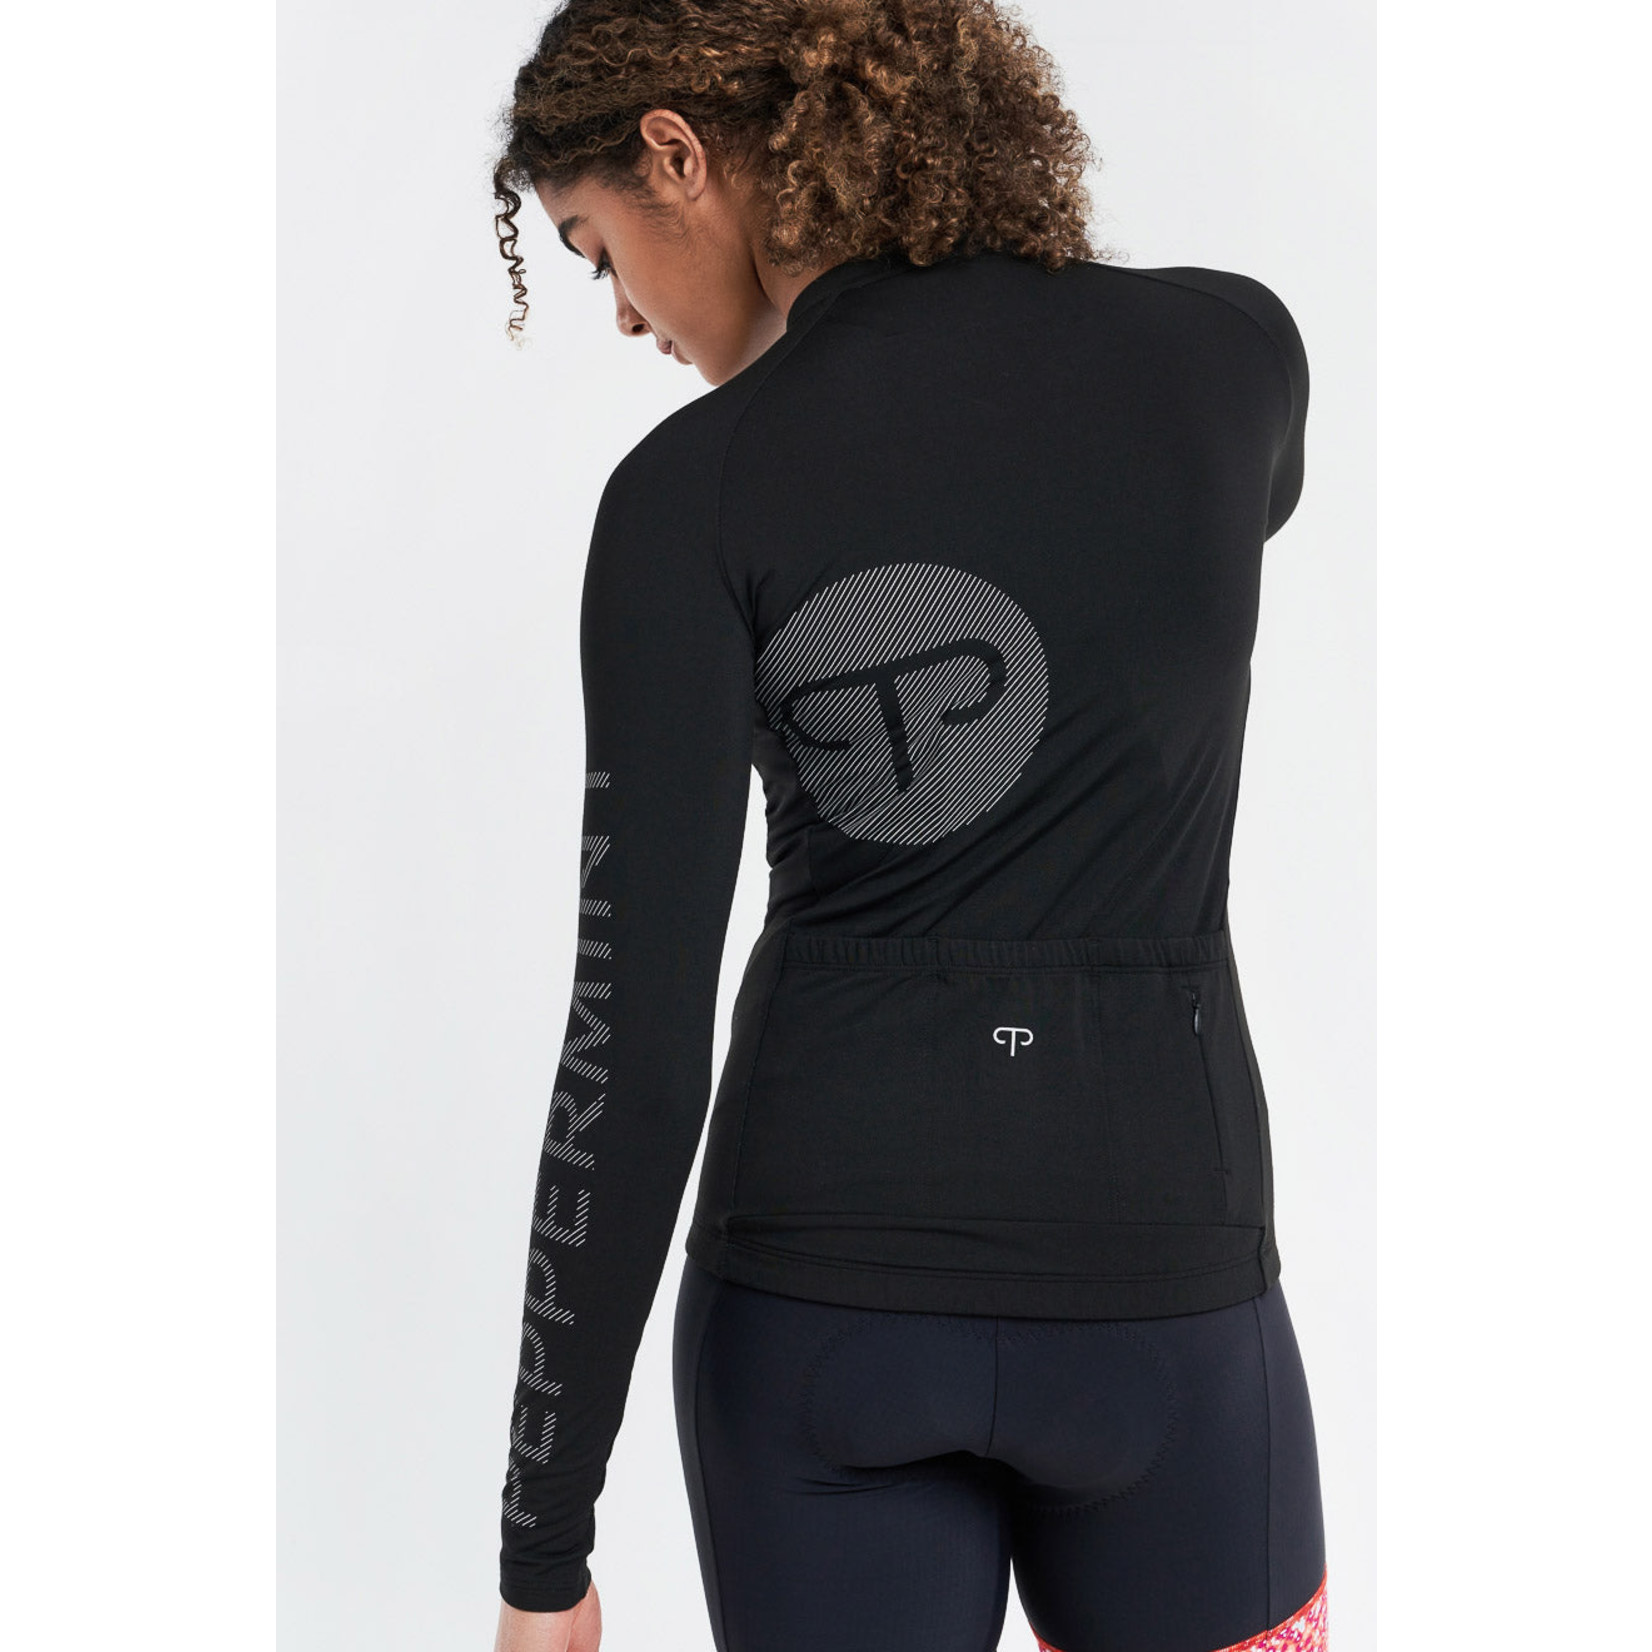 Peppermint Signature thermal jersey